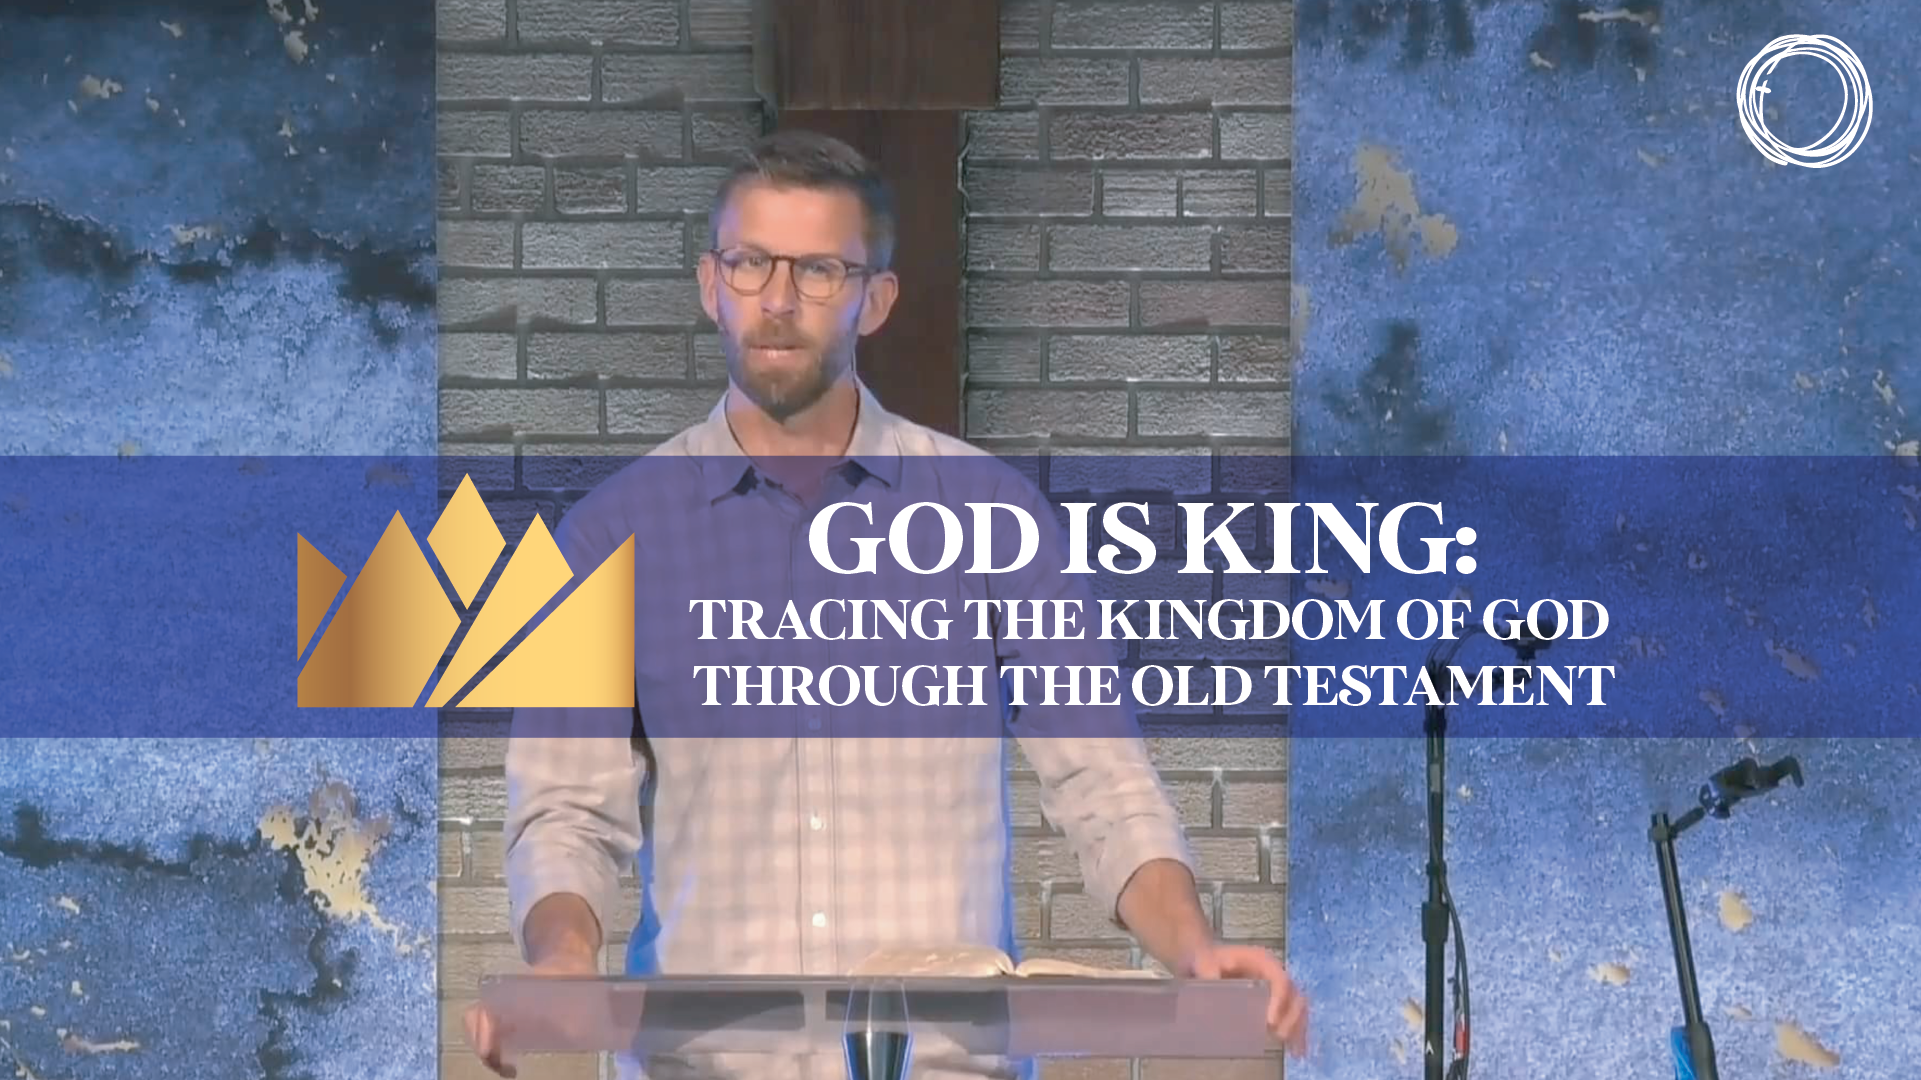 God is King: Tracing the Kingdom of God through the Old Testament